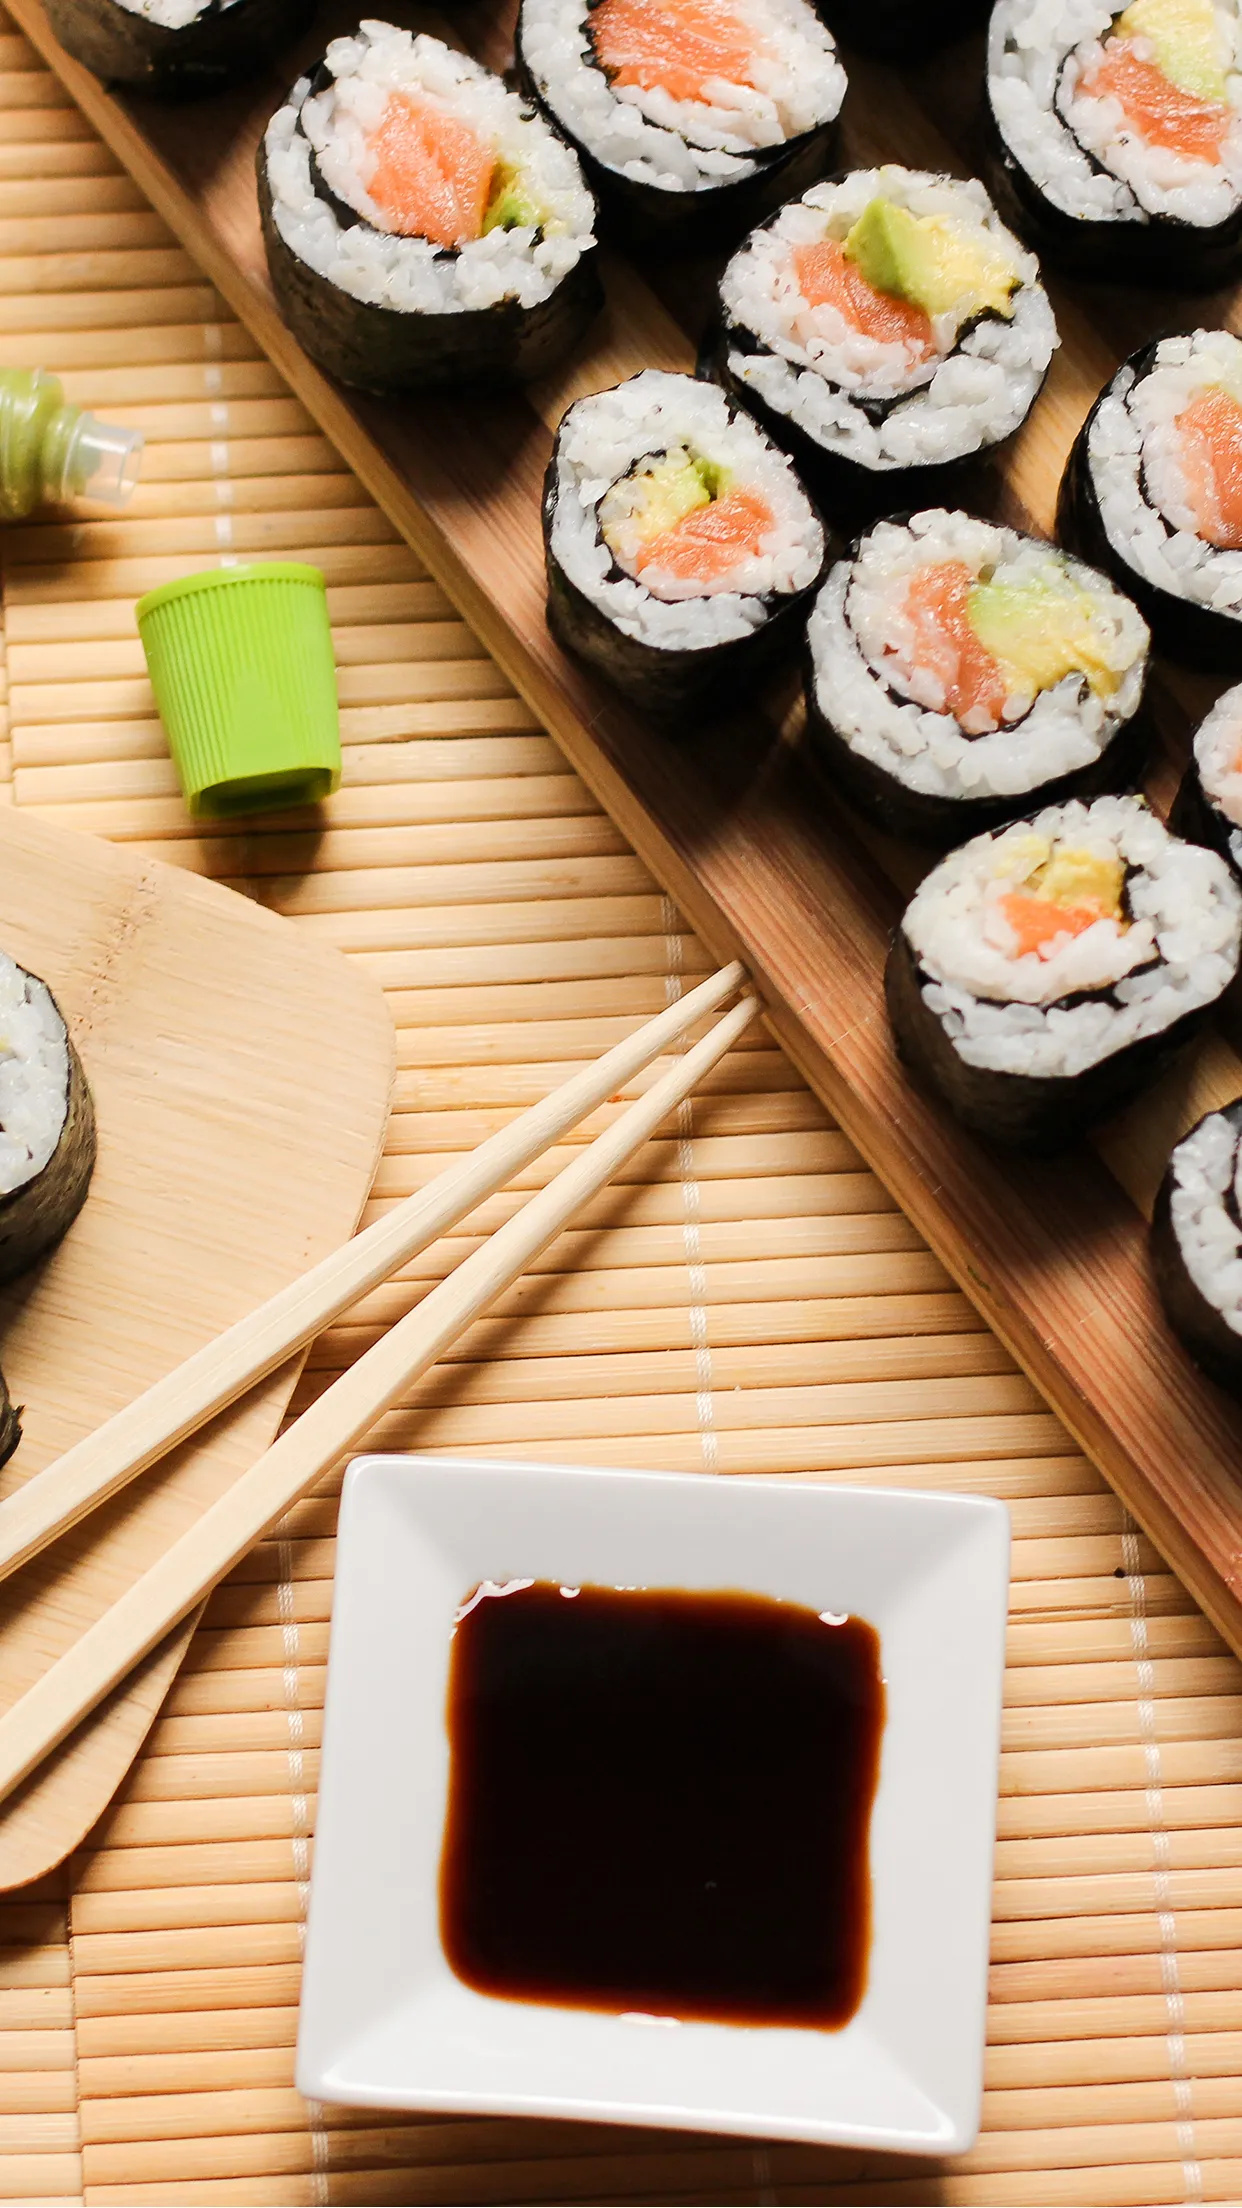 Sushi: Food, Dipped into shoyu Japanese soy sauce before eating. 1250x2210 HD Wallpaper.